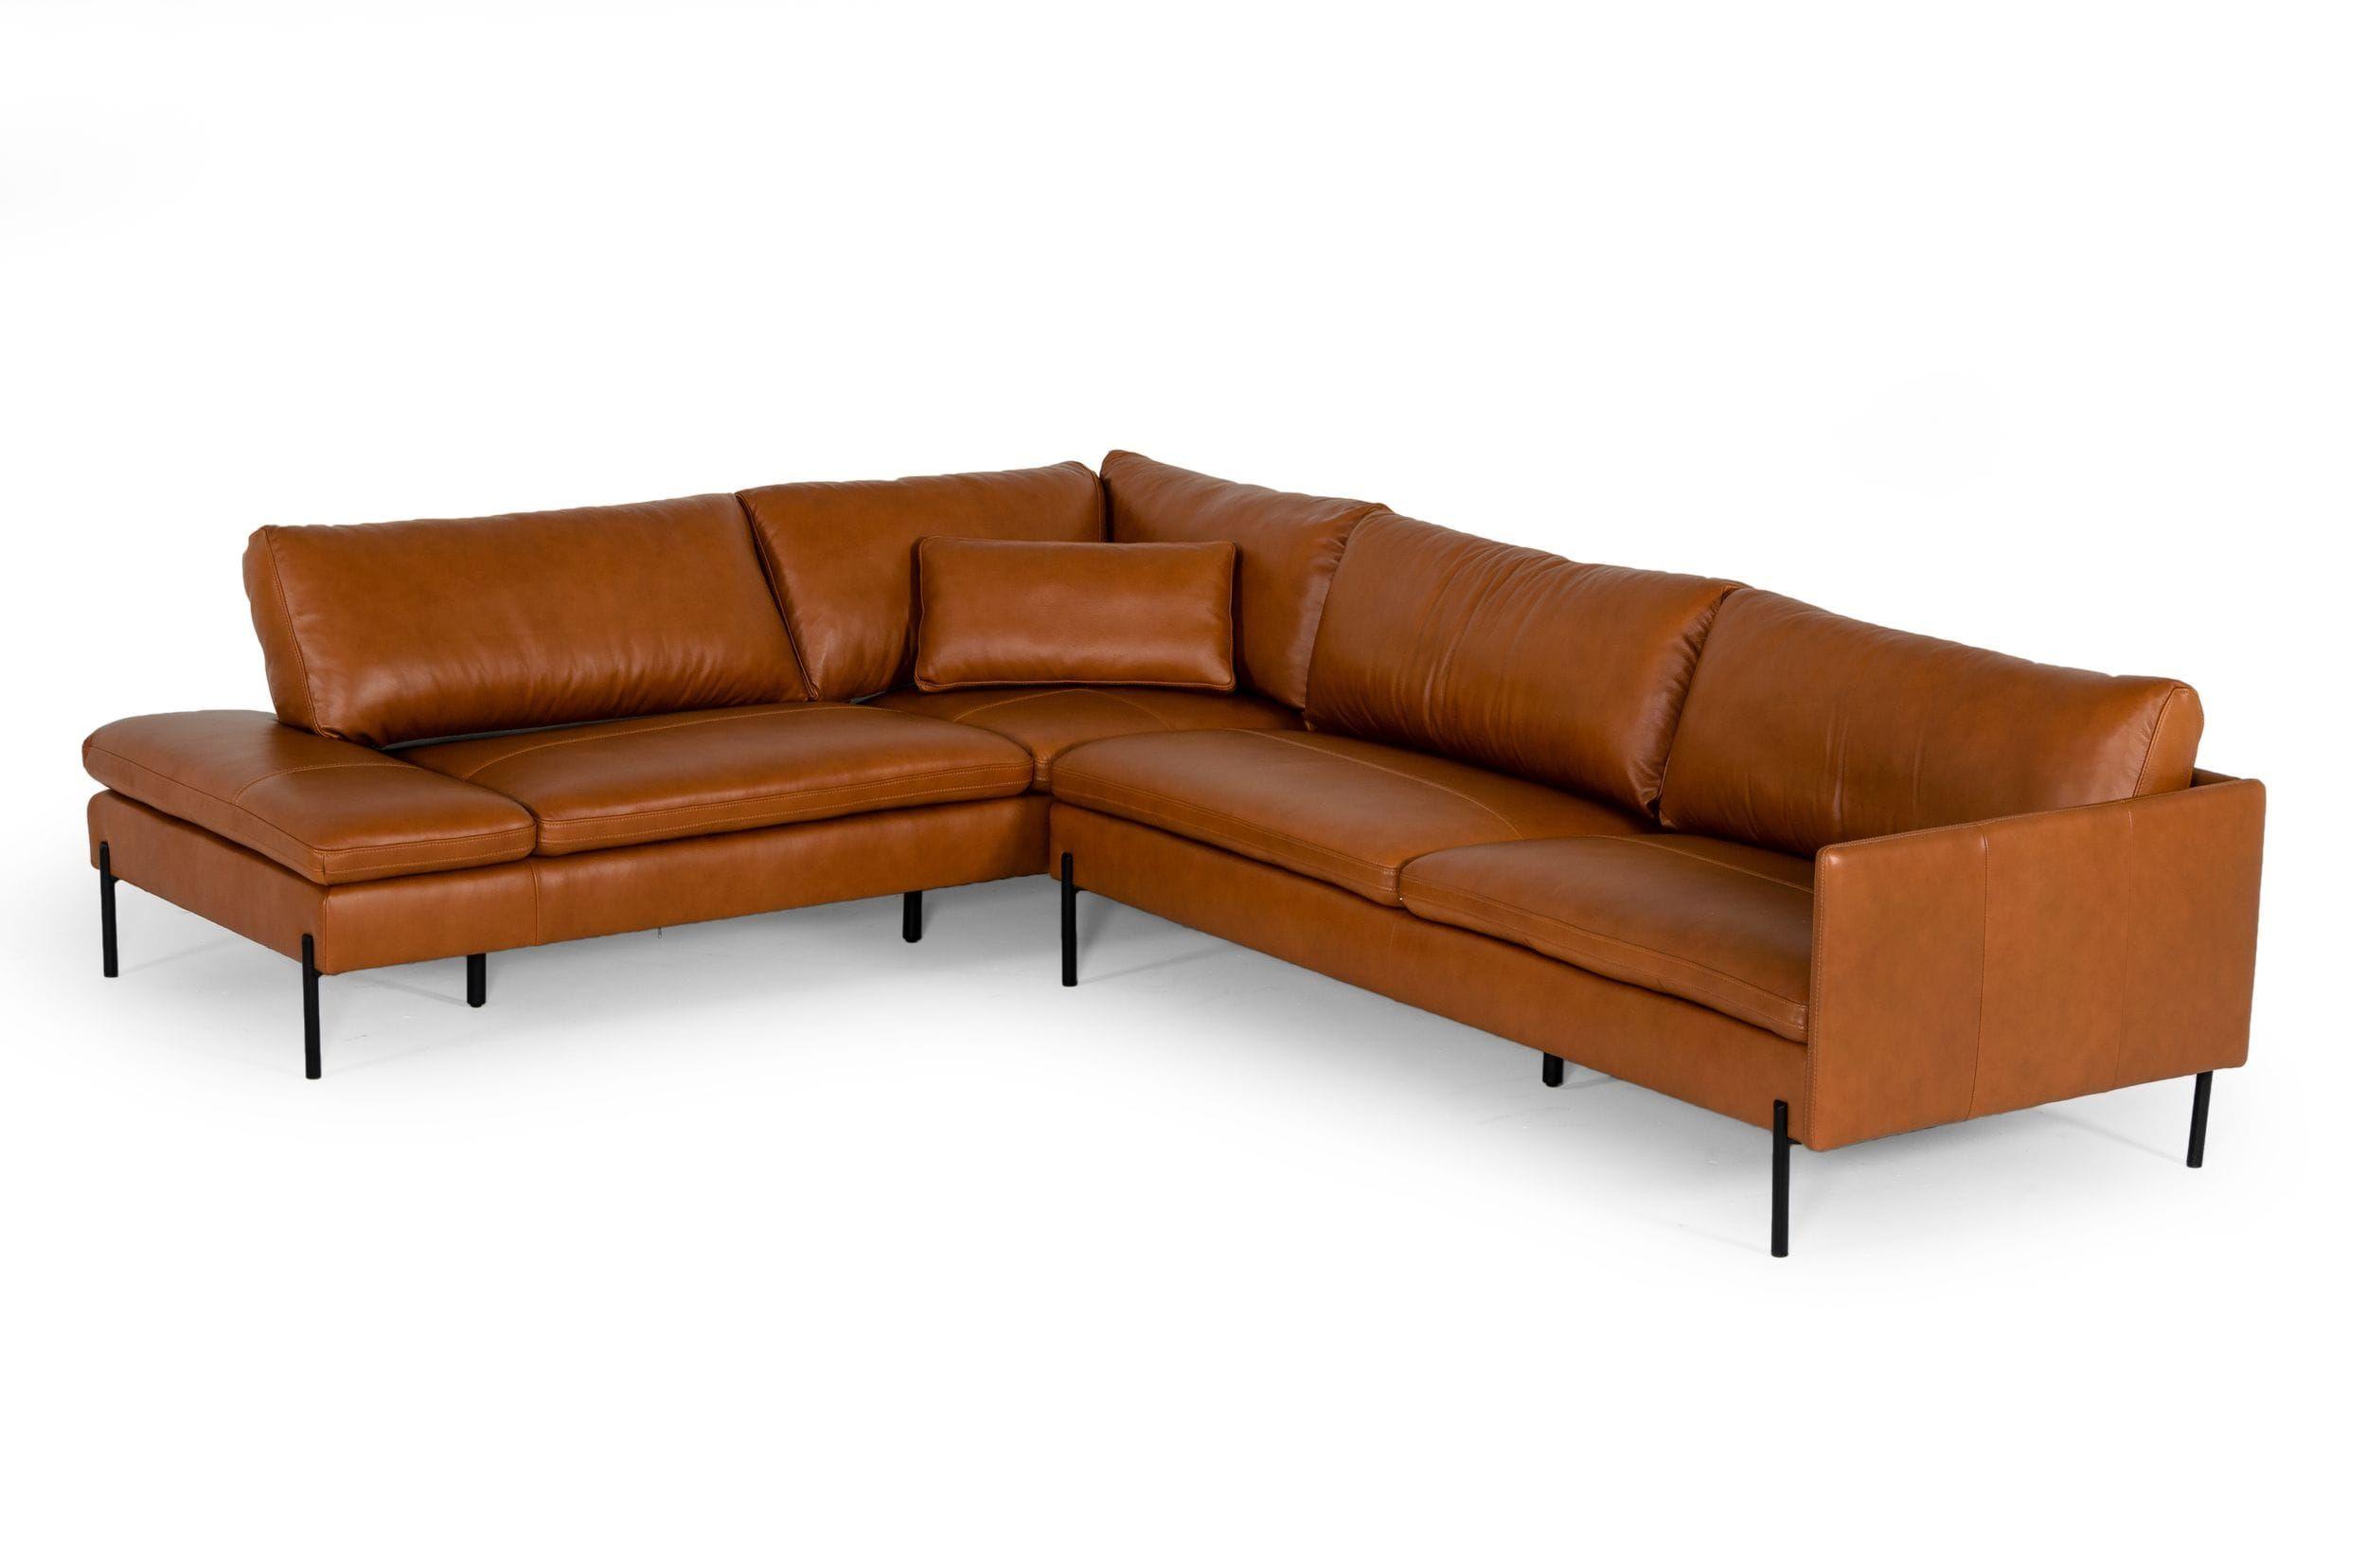 Contemporary, Modern Sectional Sofa VGKKKF.1061Z-CGN-LAF-SECT VGKKKF.1061Z-CGN-LAF-SECT in Cognac Genuine Leather